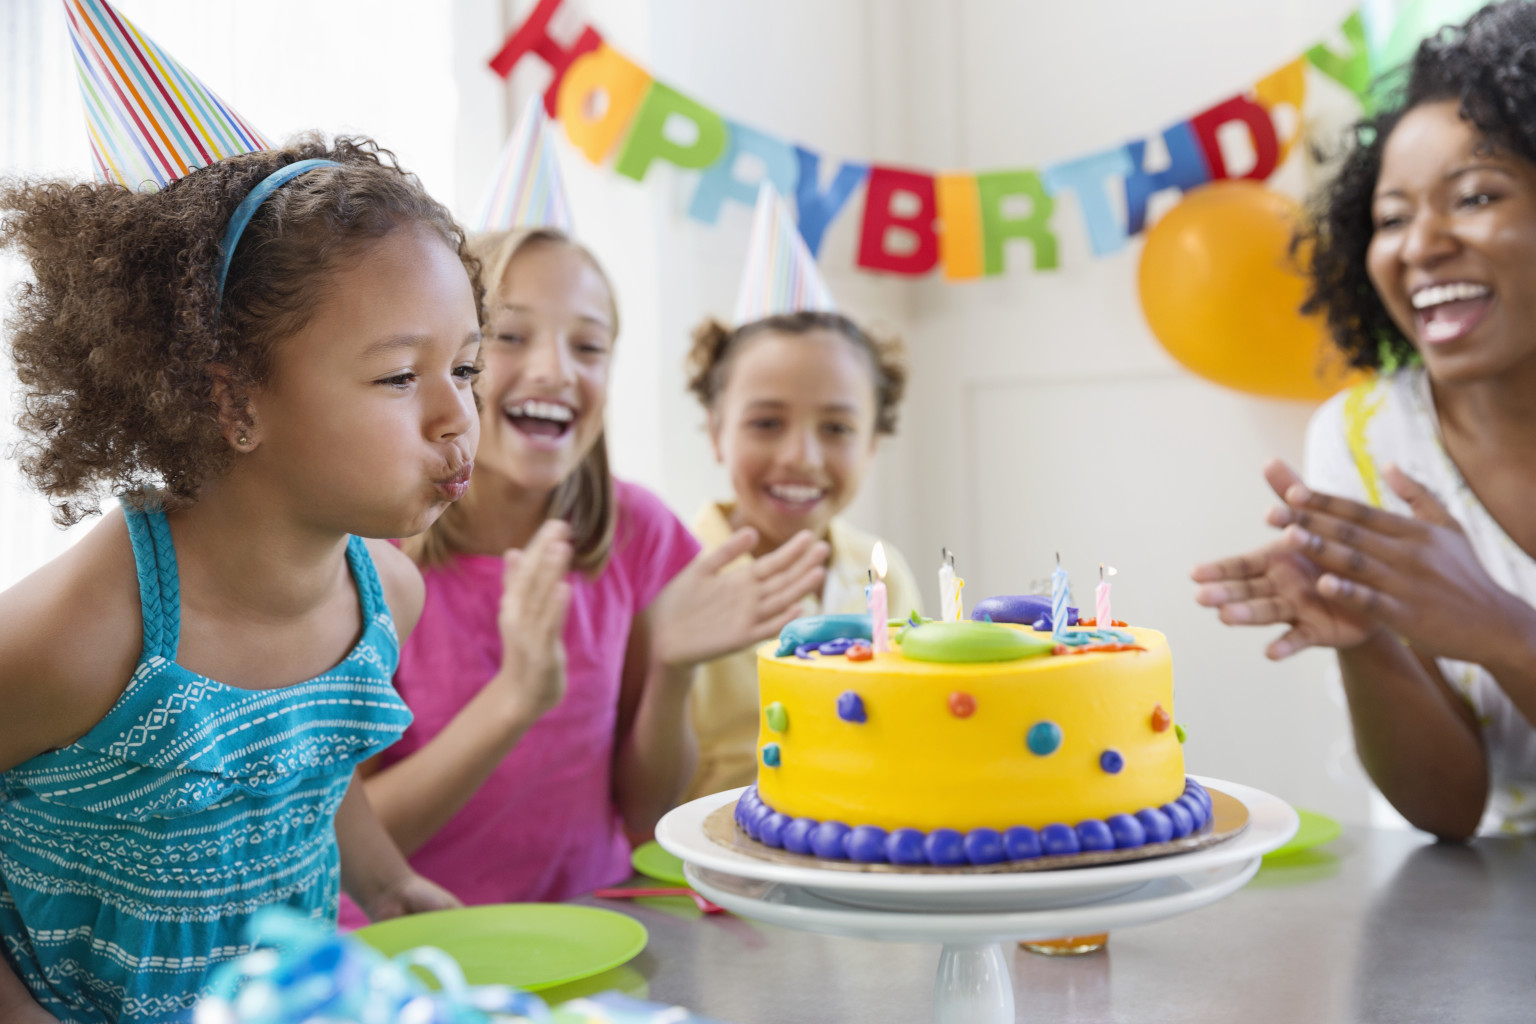 5 Hot Trends for Kids' Birthday Parties | Dana Holmes